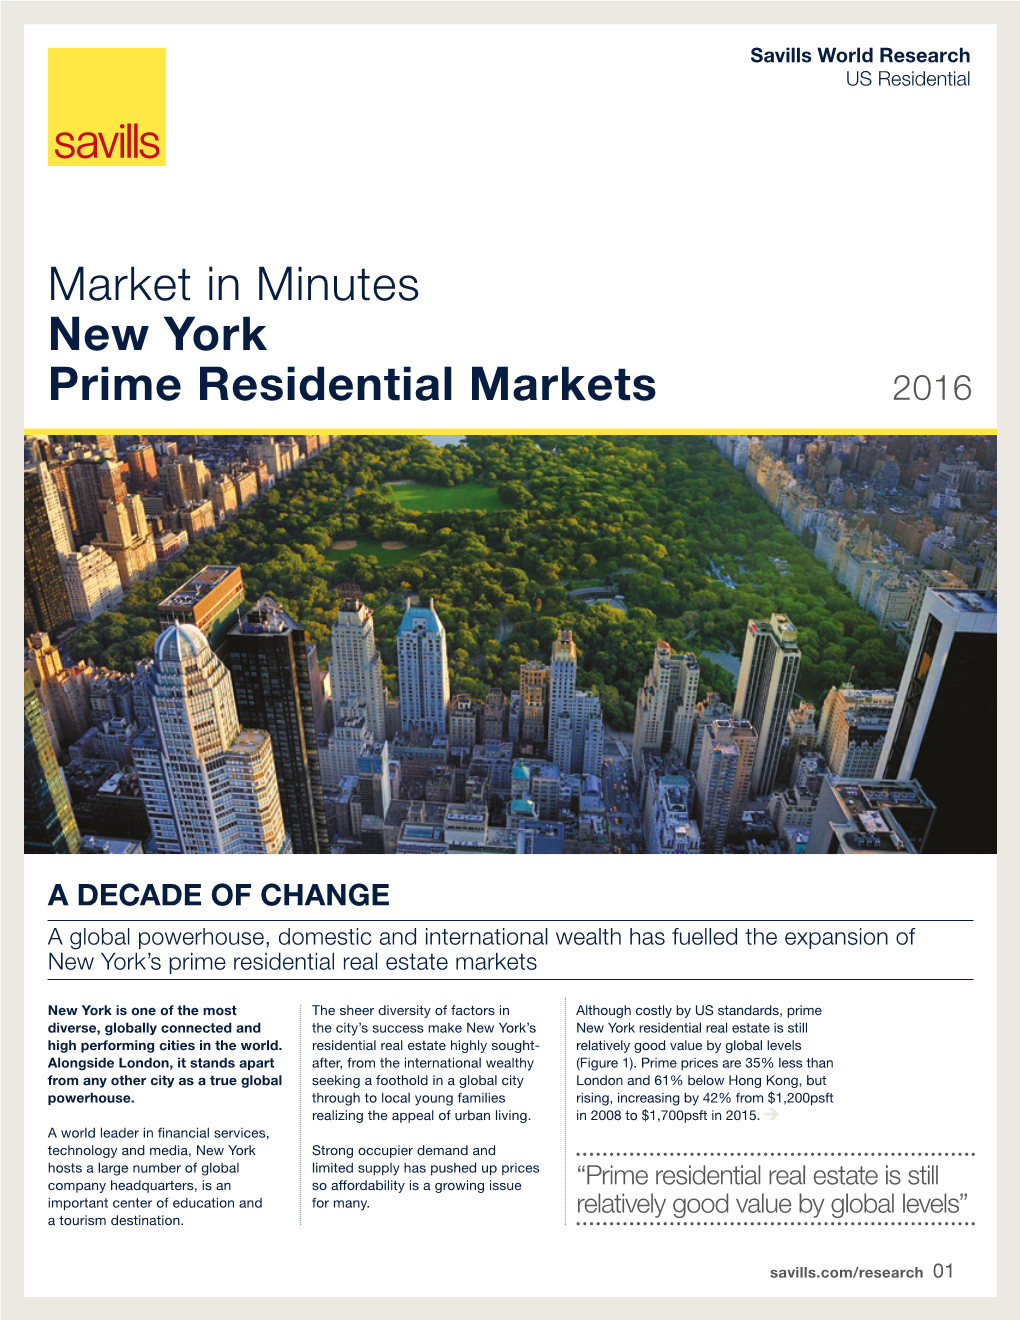 Market in Minutes New York Prime Residential Markets 2016